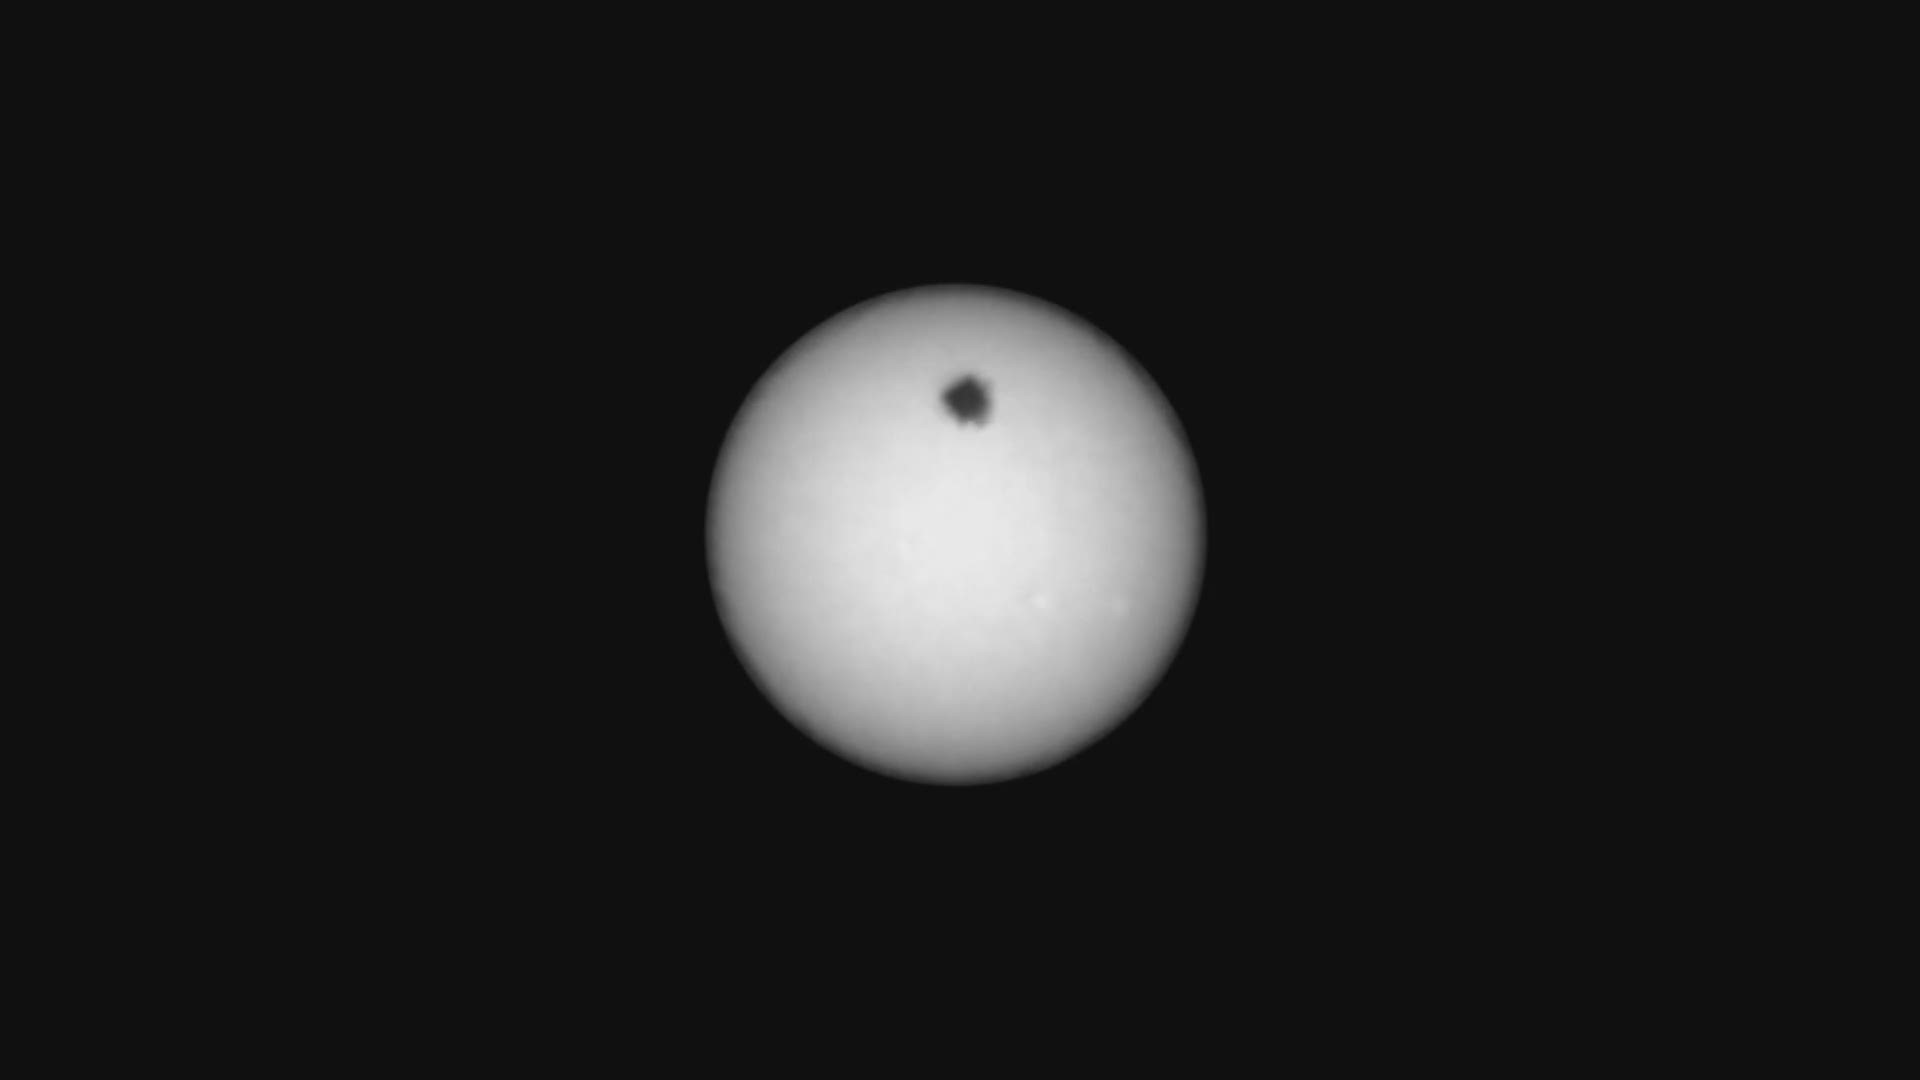 This series of images shows the Martian moon Deimos as it crossed in front of the Sun, as seen by NASA's Curiosity Mars rover on Sunday, March 17, 2019. (NASA)